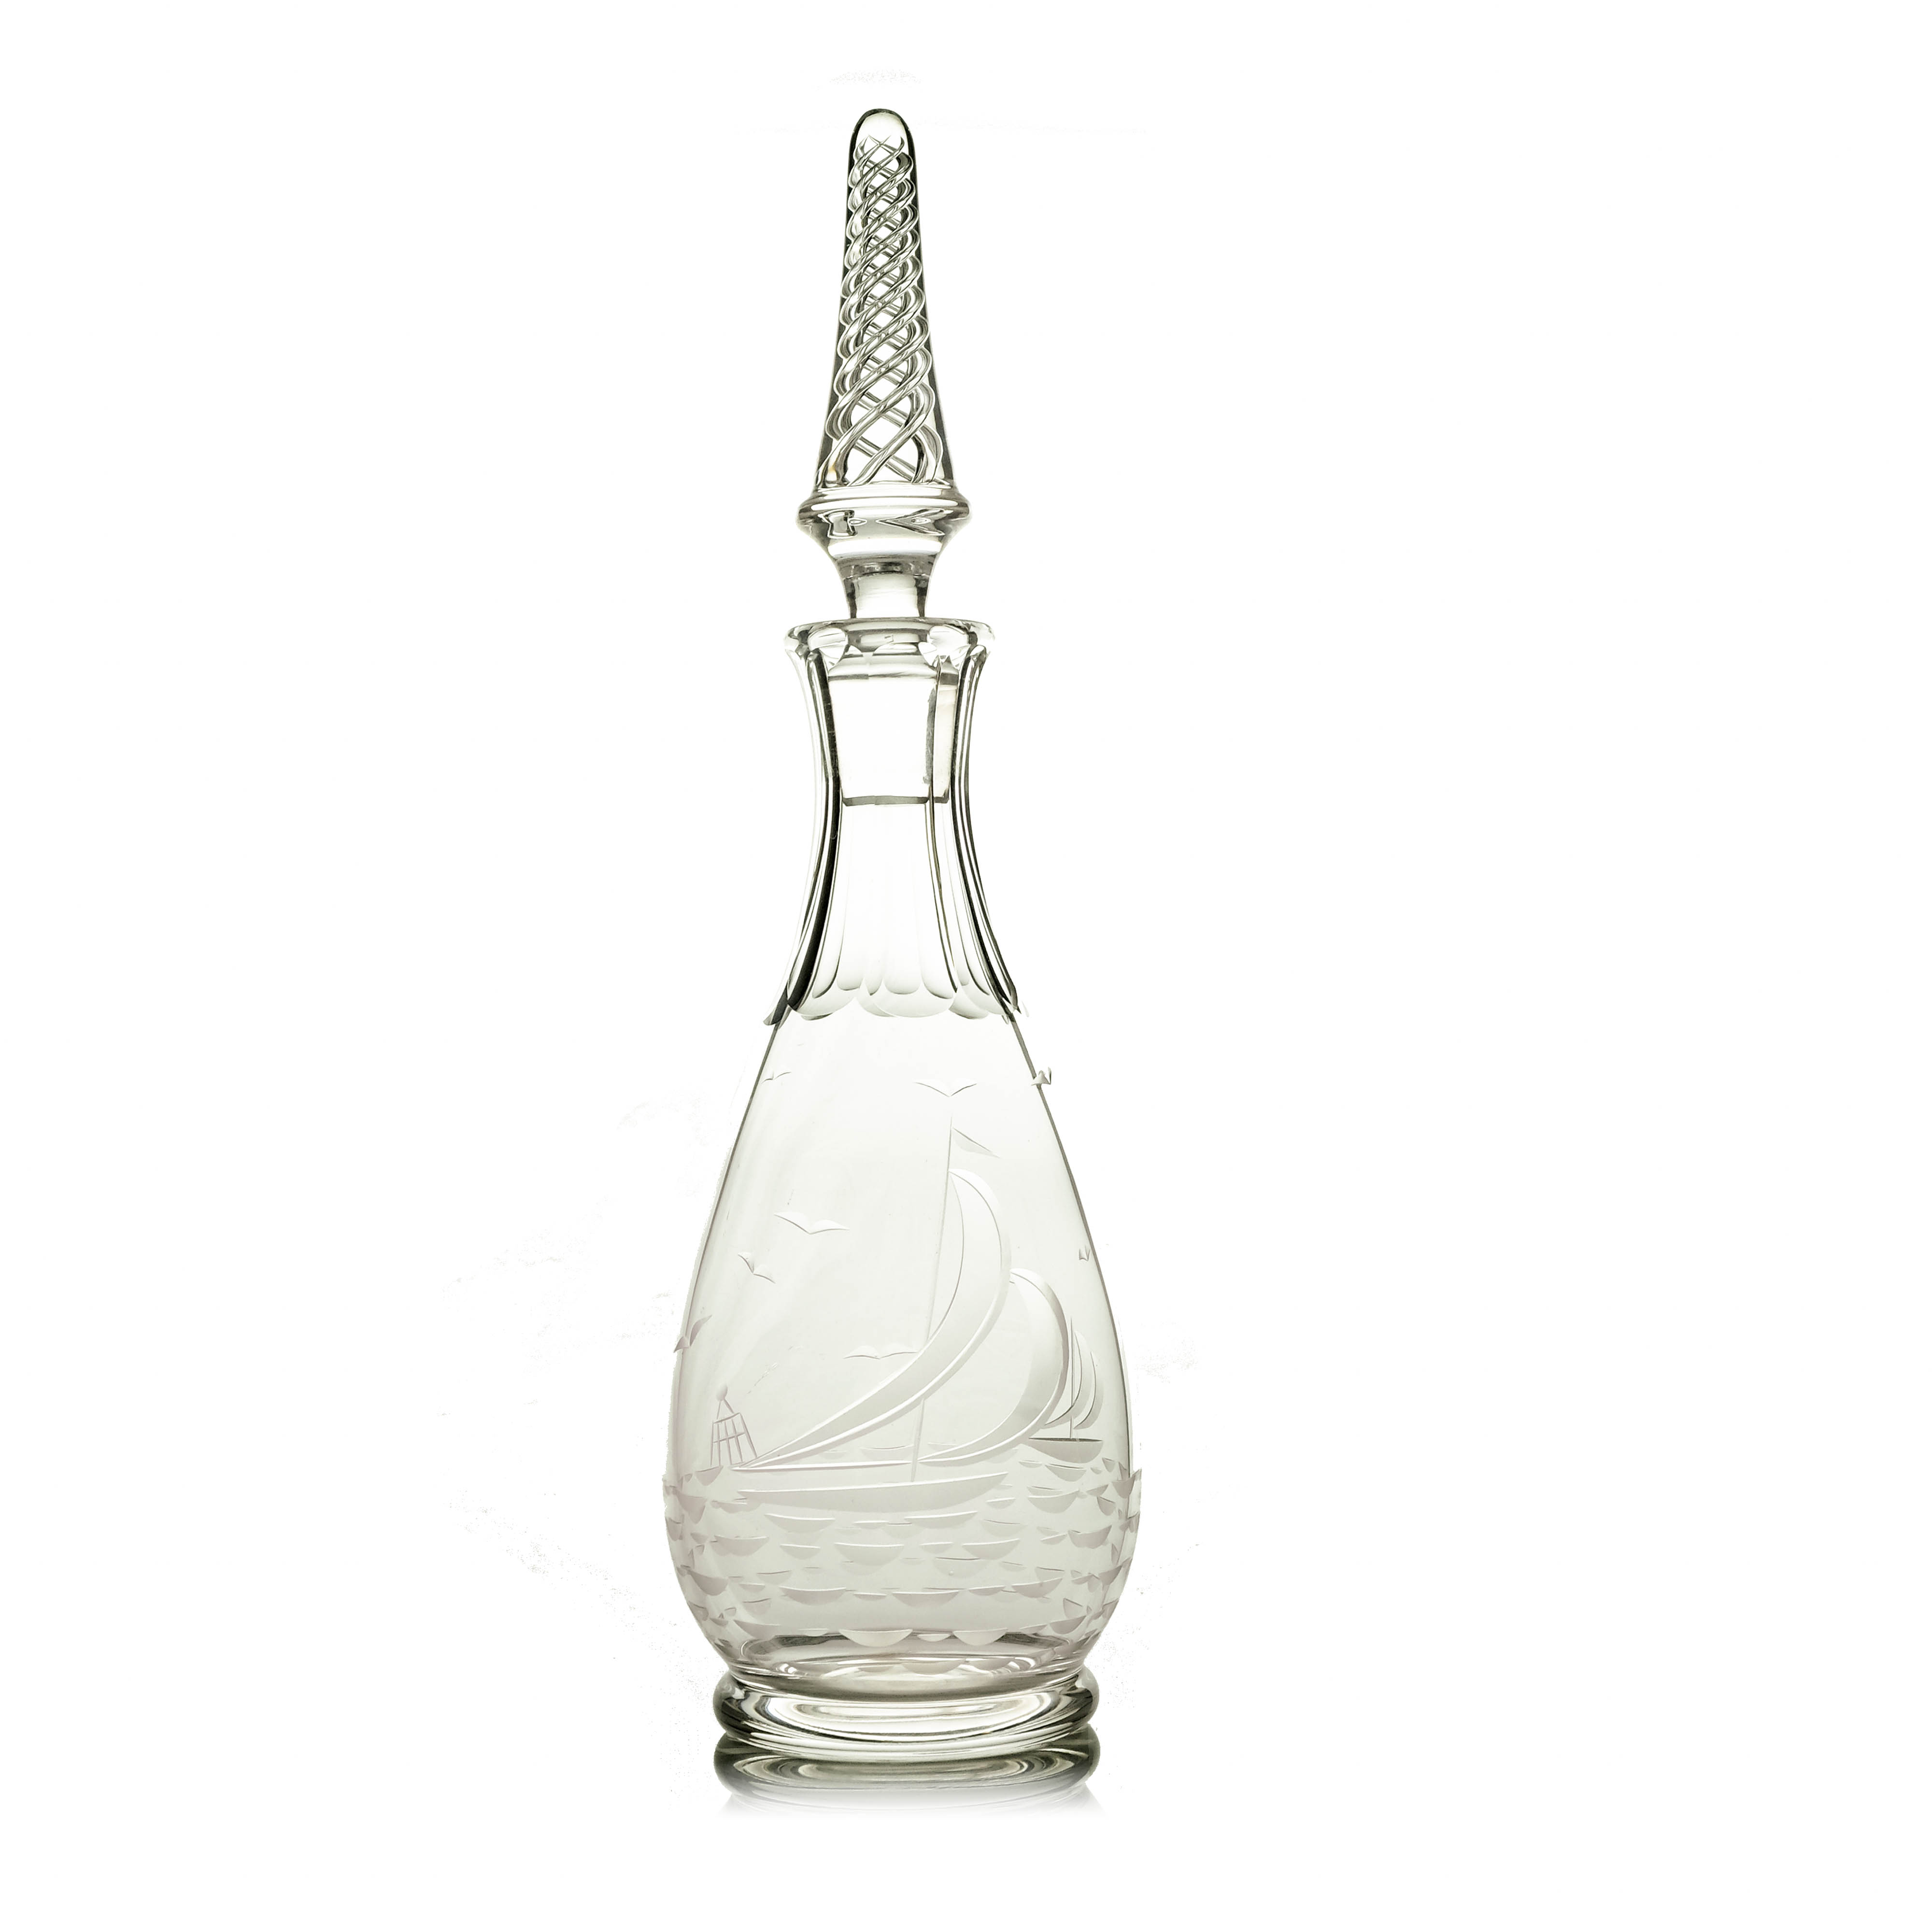 John Luxton for Stuart and Sons, a Modernist cut glass decanter, Commodore pattern